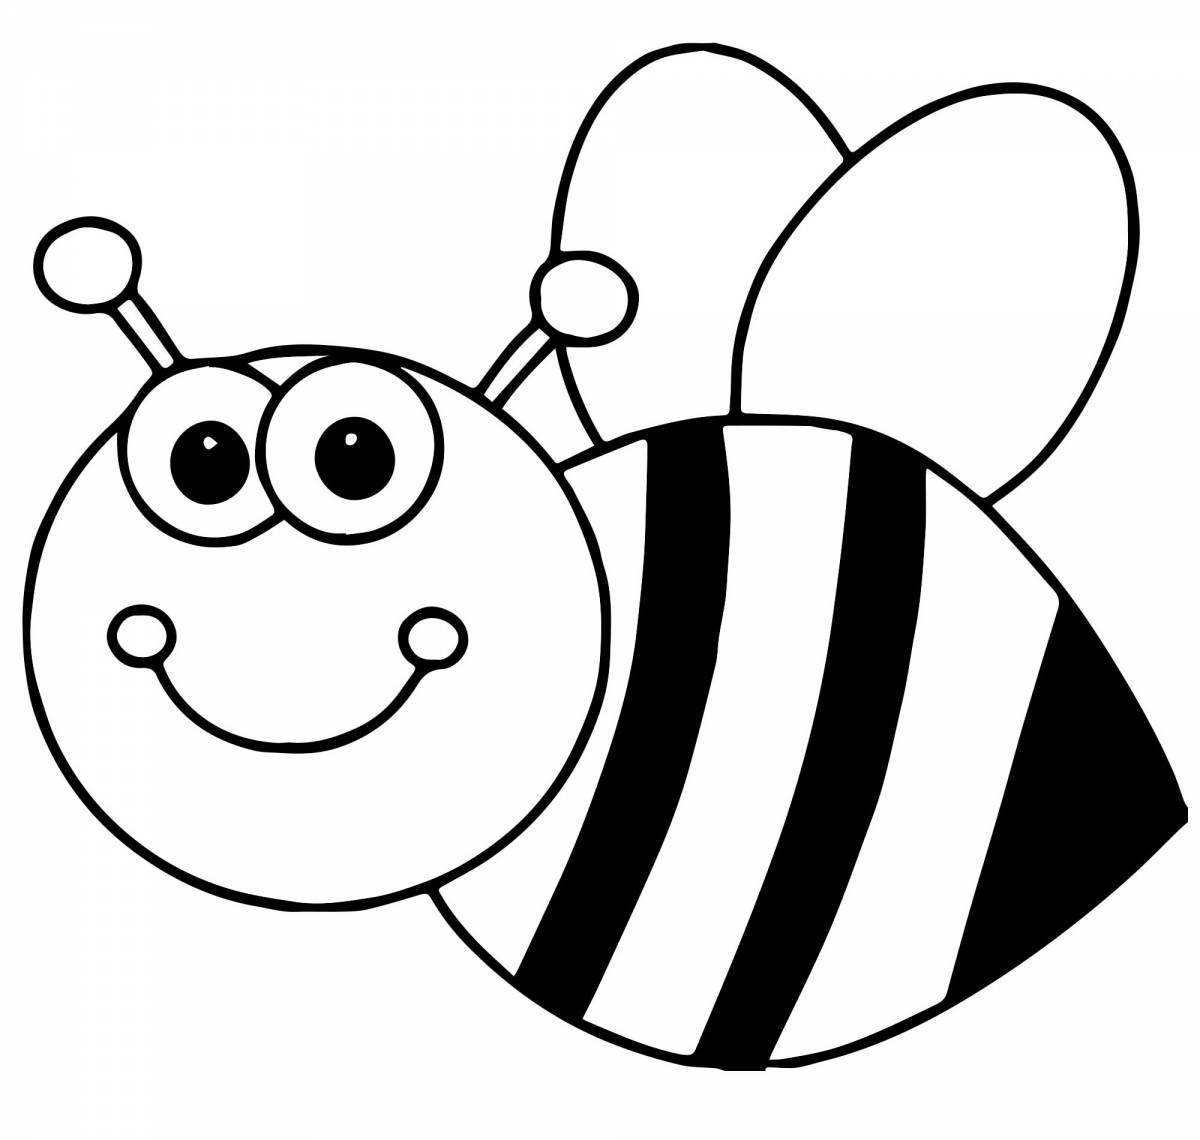 Magic bee coloring book for kids